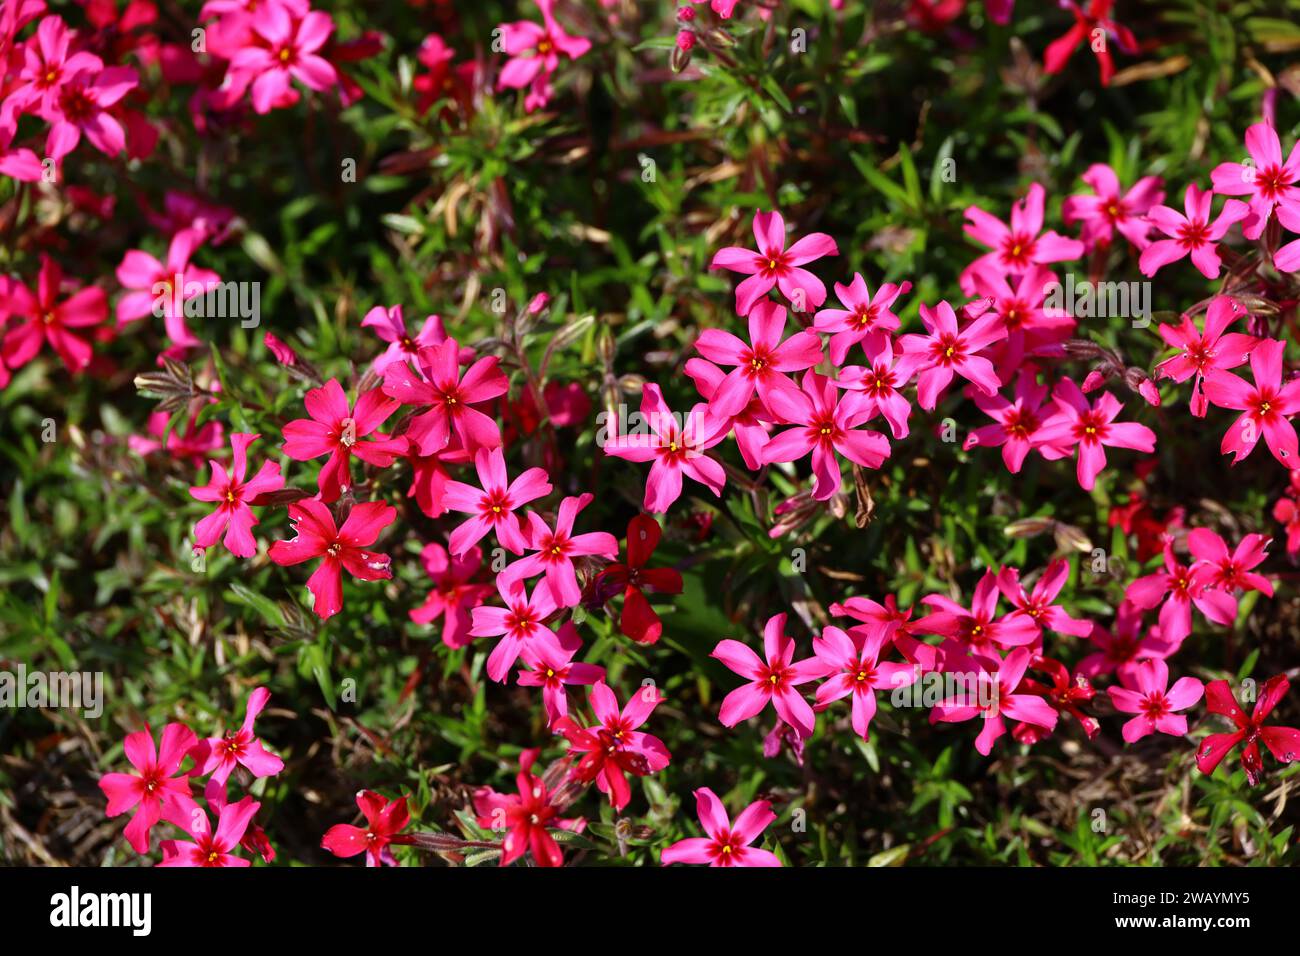 A close-up background photo of a pink moss phlox flower bed Stock Photo